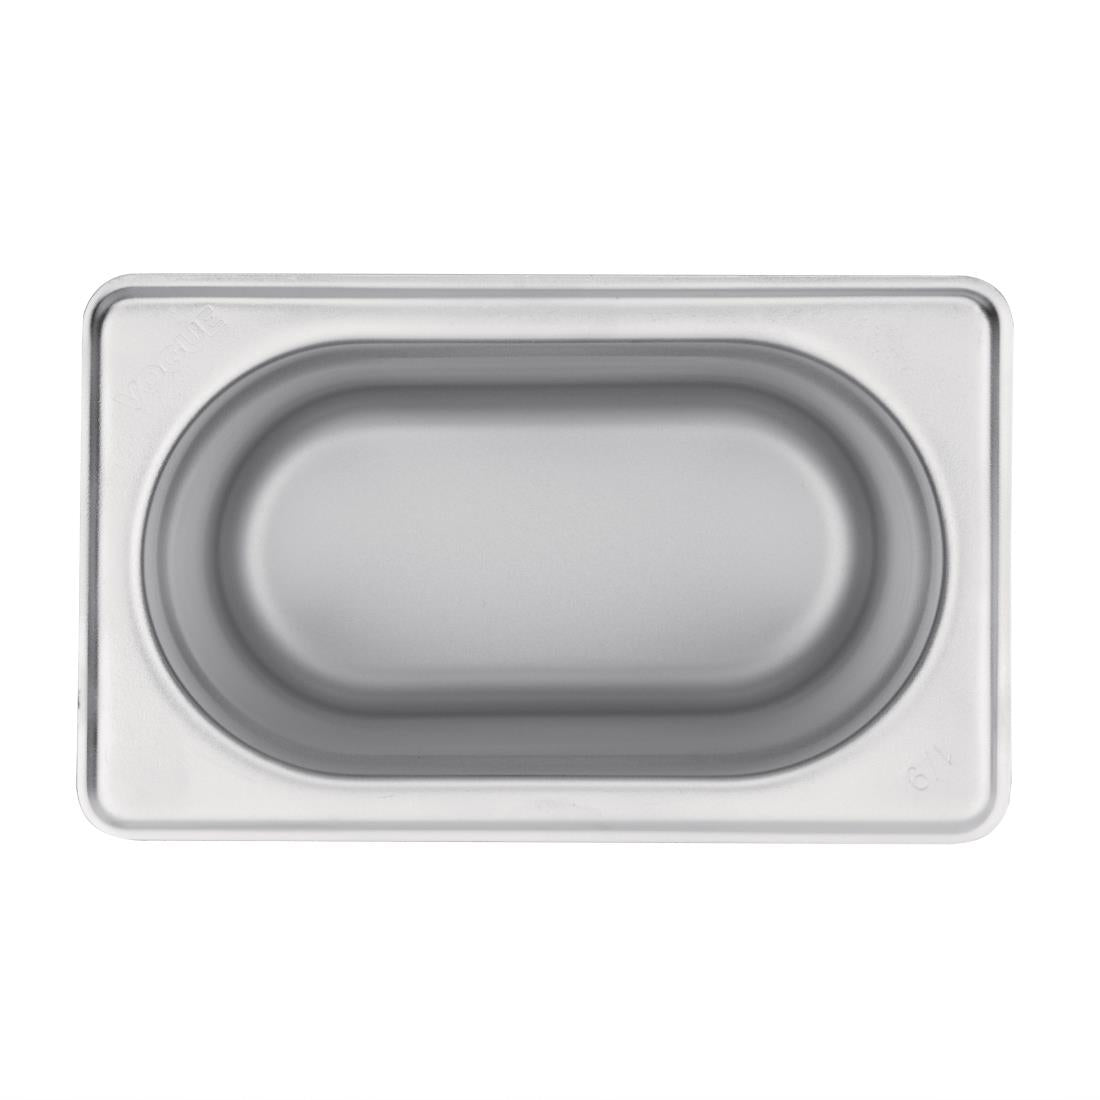 K826 Vogue Stainless Steel 1/9 Gastronorm Pan 150mm JD Catering Equipment Solutions Ltd